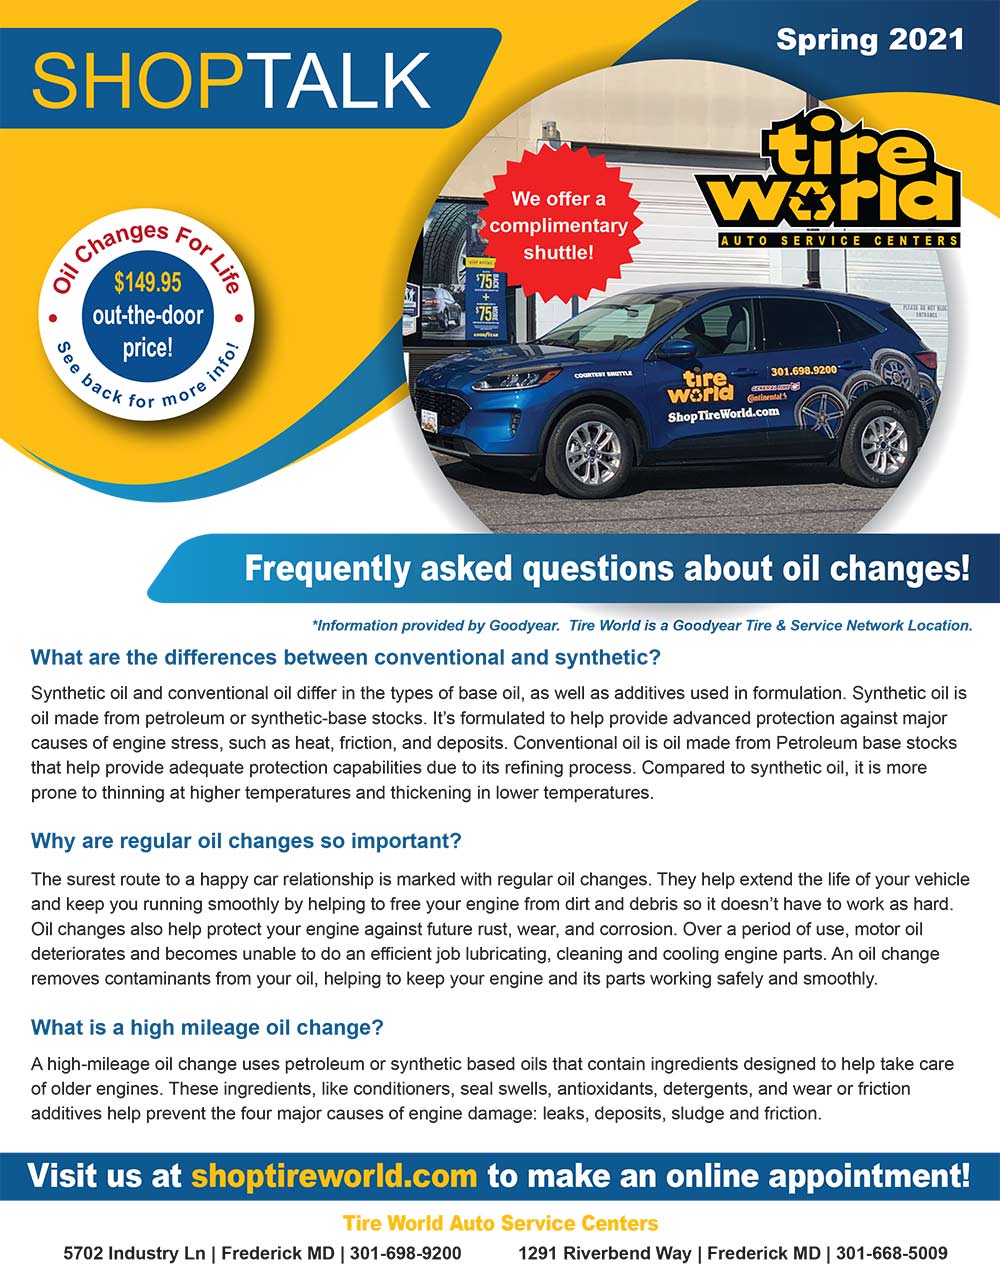 Check out the Tire World Spring Newsletter for exclusive deals and information about reduced contact options!